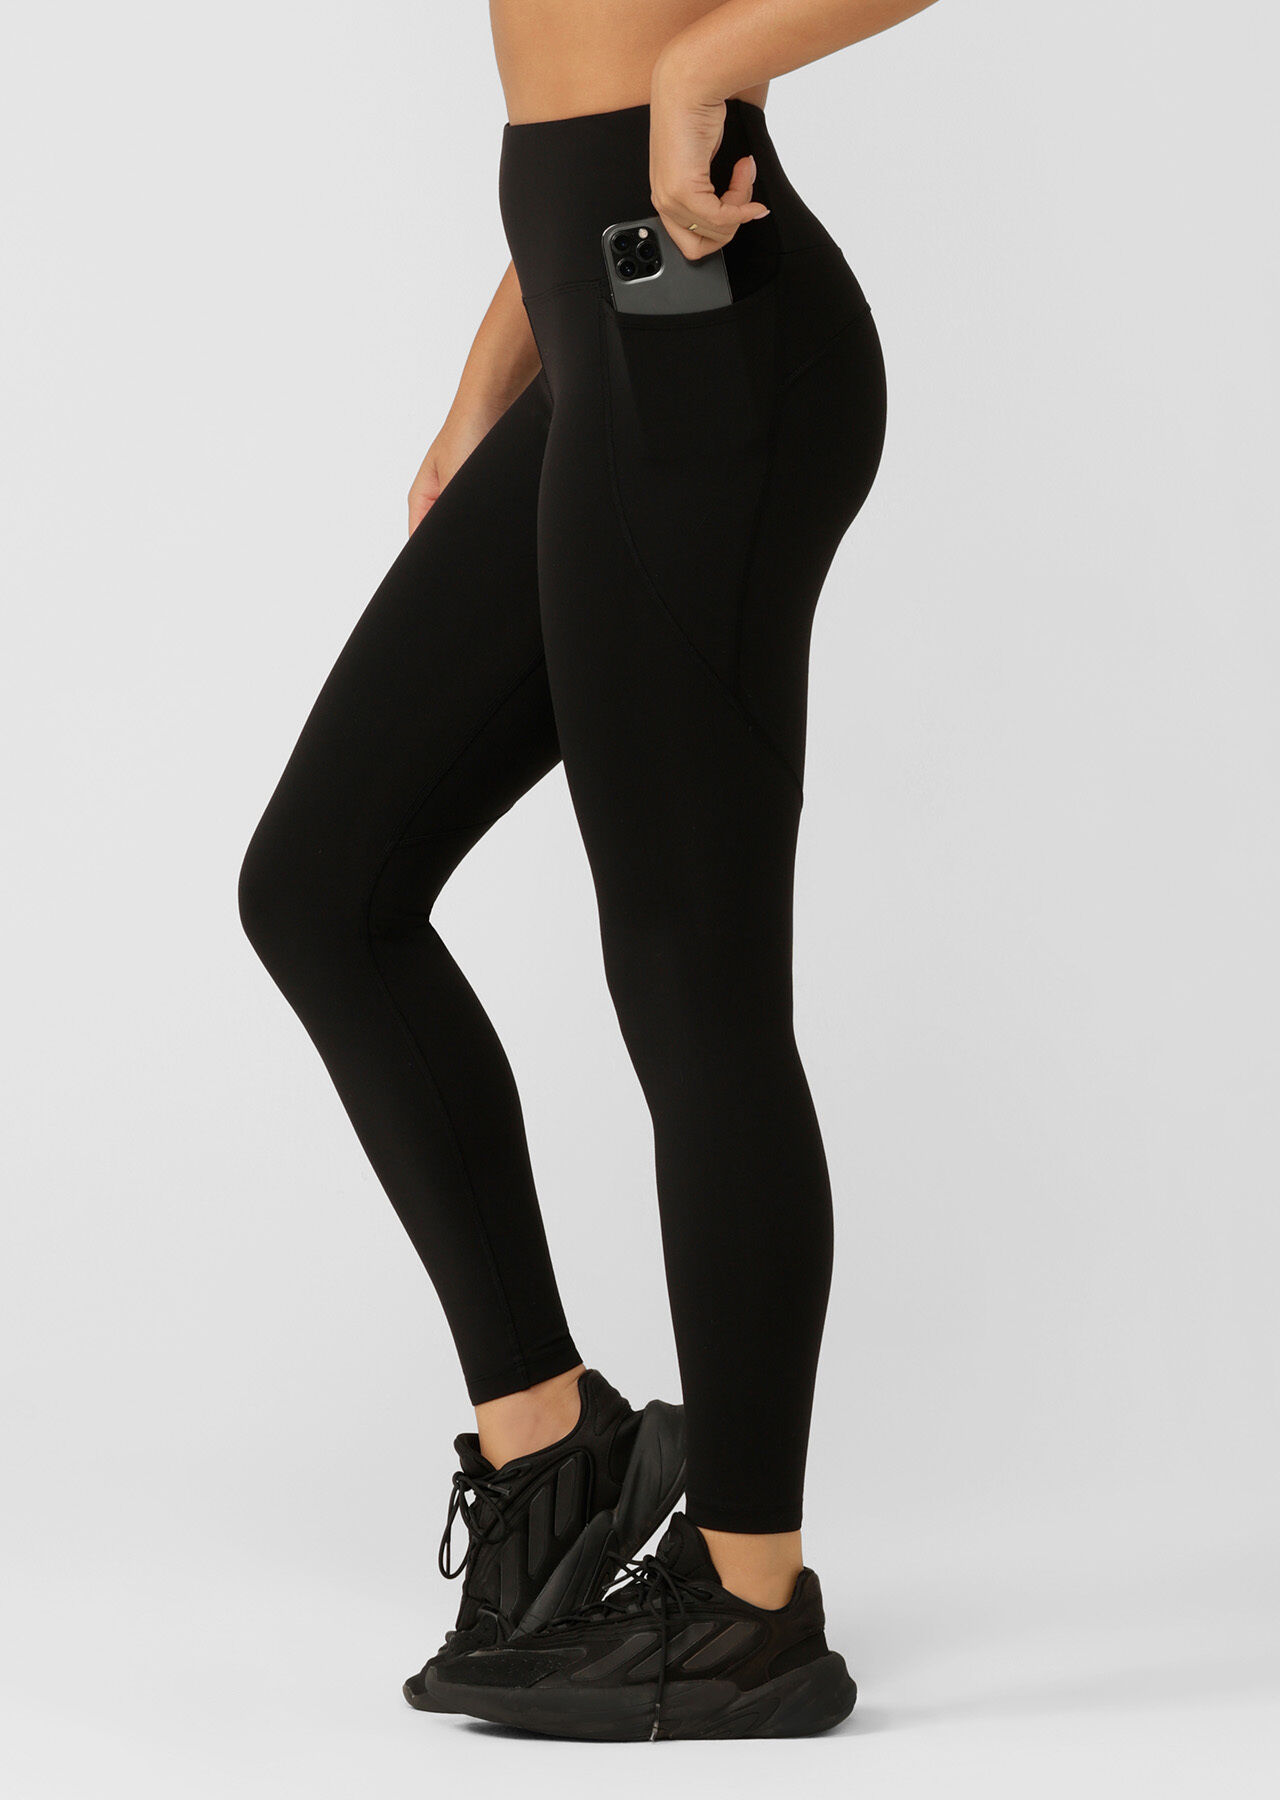 Buy Womens Girls Gym wear Yoga Leggings Workout Track Pant with 2 Side  Pockets and one Zip Waist Pocket/Stretchable Tights/Highwaist Sports  Fitness Black at Amazon.in